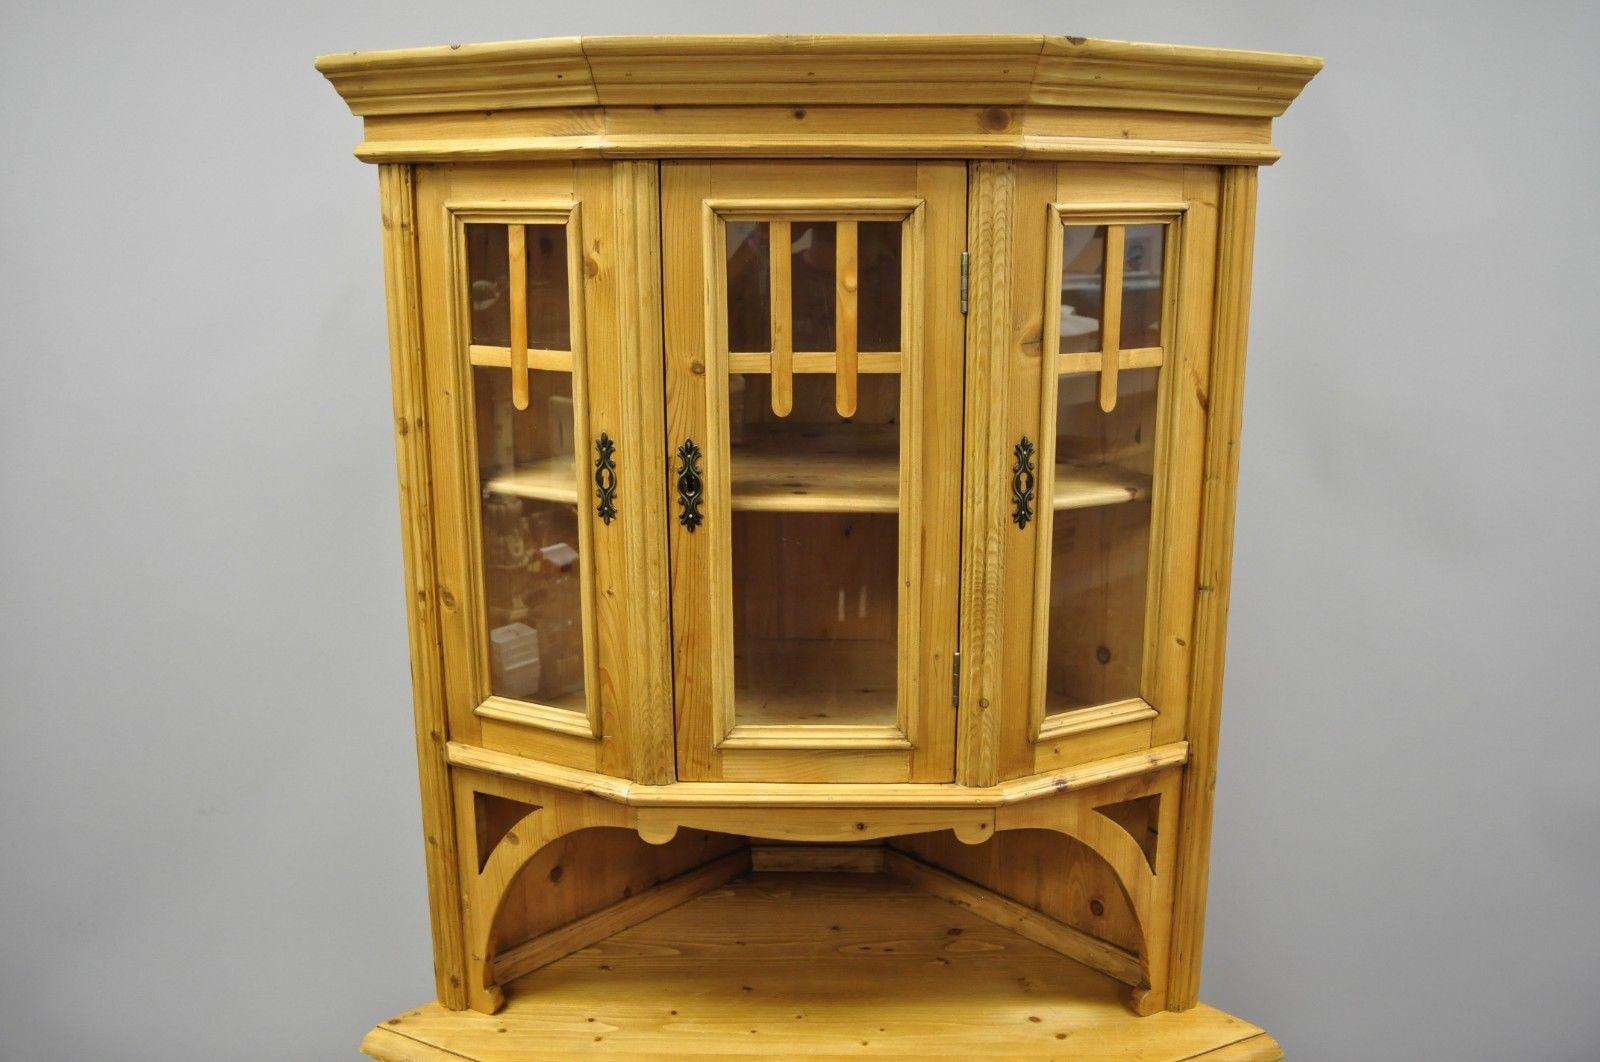 Pine wood country French primitive corner cupboard cabinet. Item features solid wood construction, beautiful wood grain, two part construction, two swing doors, working lock and key, 1 dovetailed drawer, and wooden shelves, late 20th century.